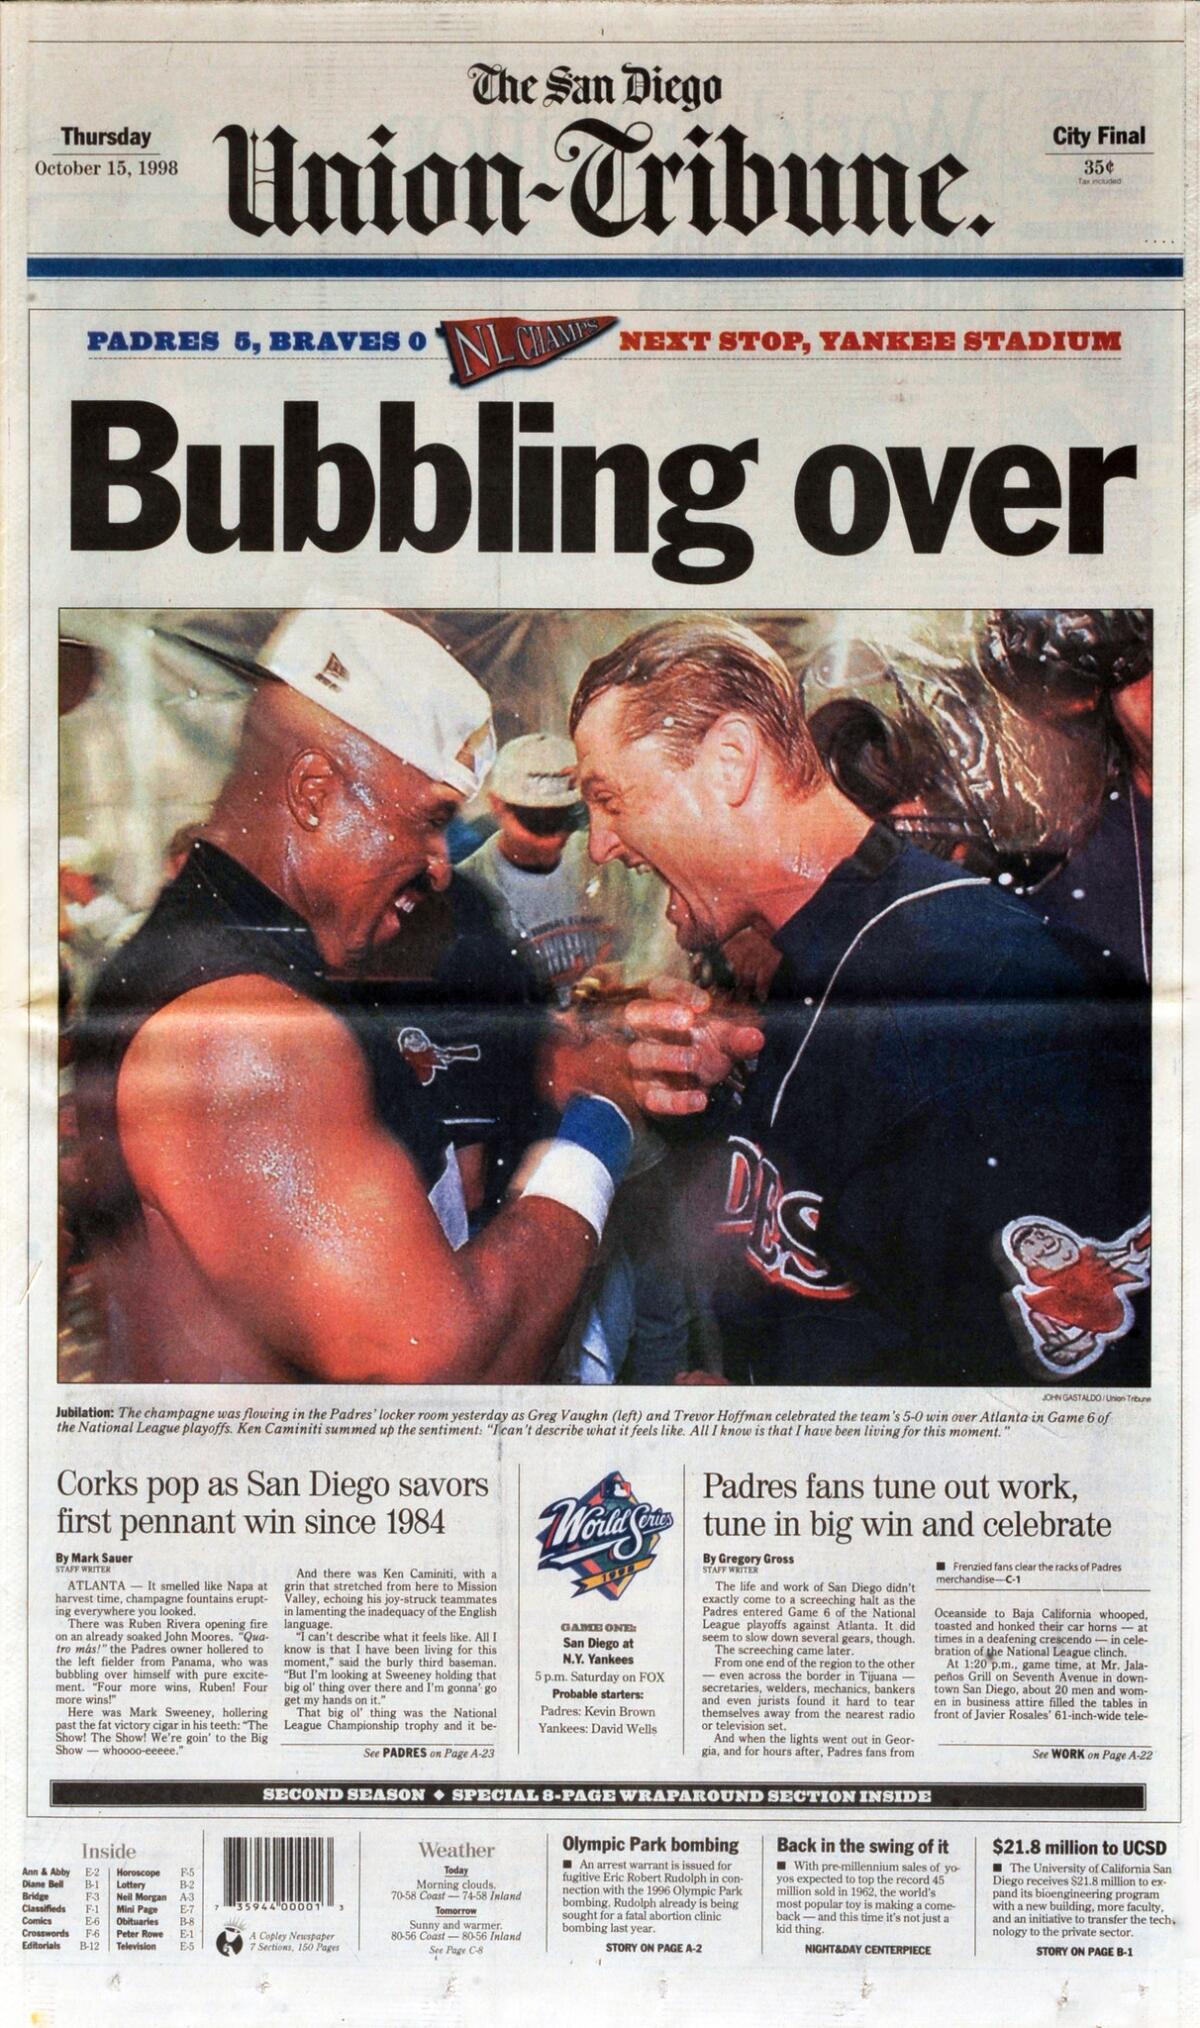 October 15, 1998: Padres win the pennant - The San Diego Union-Tribune